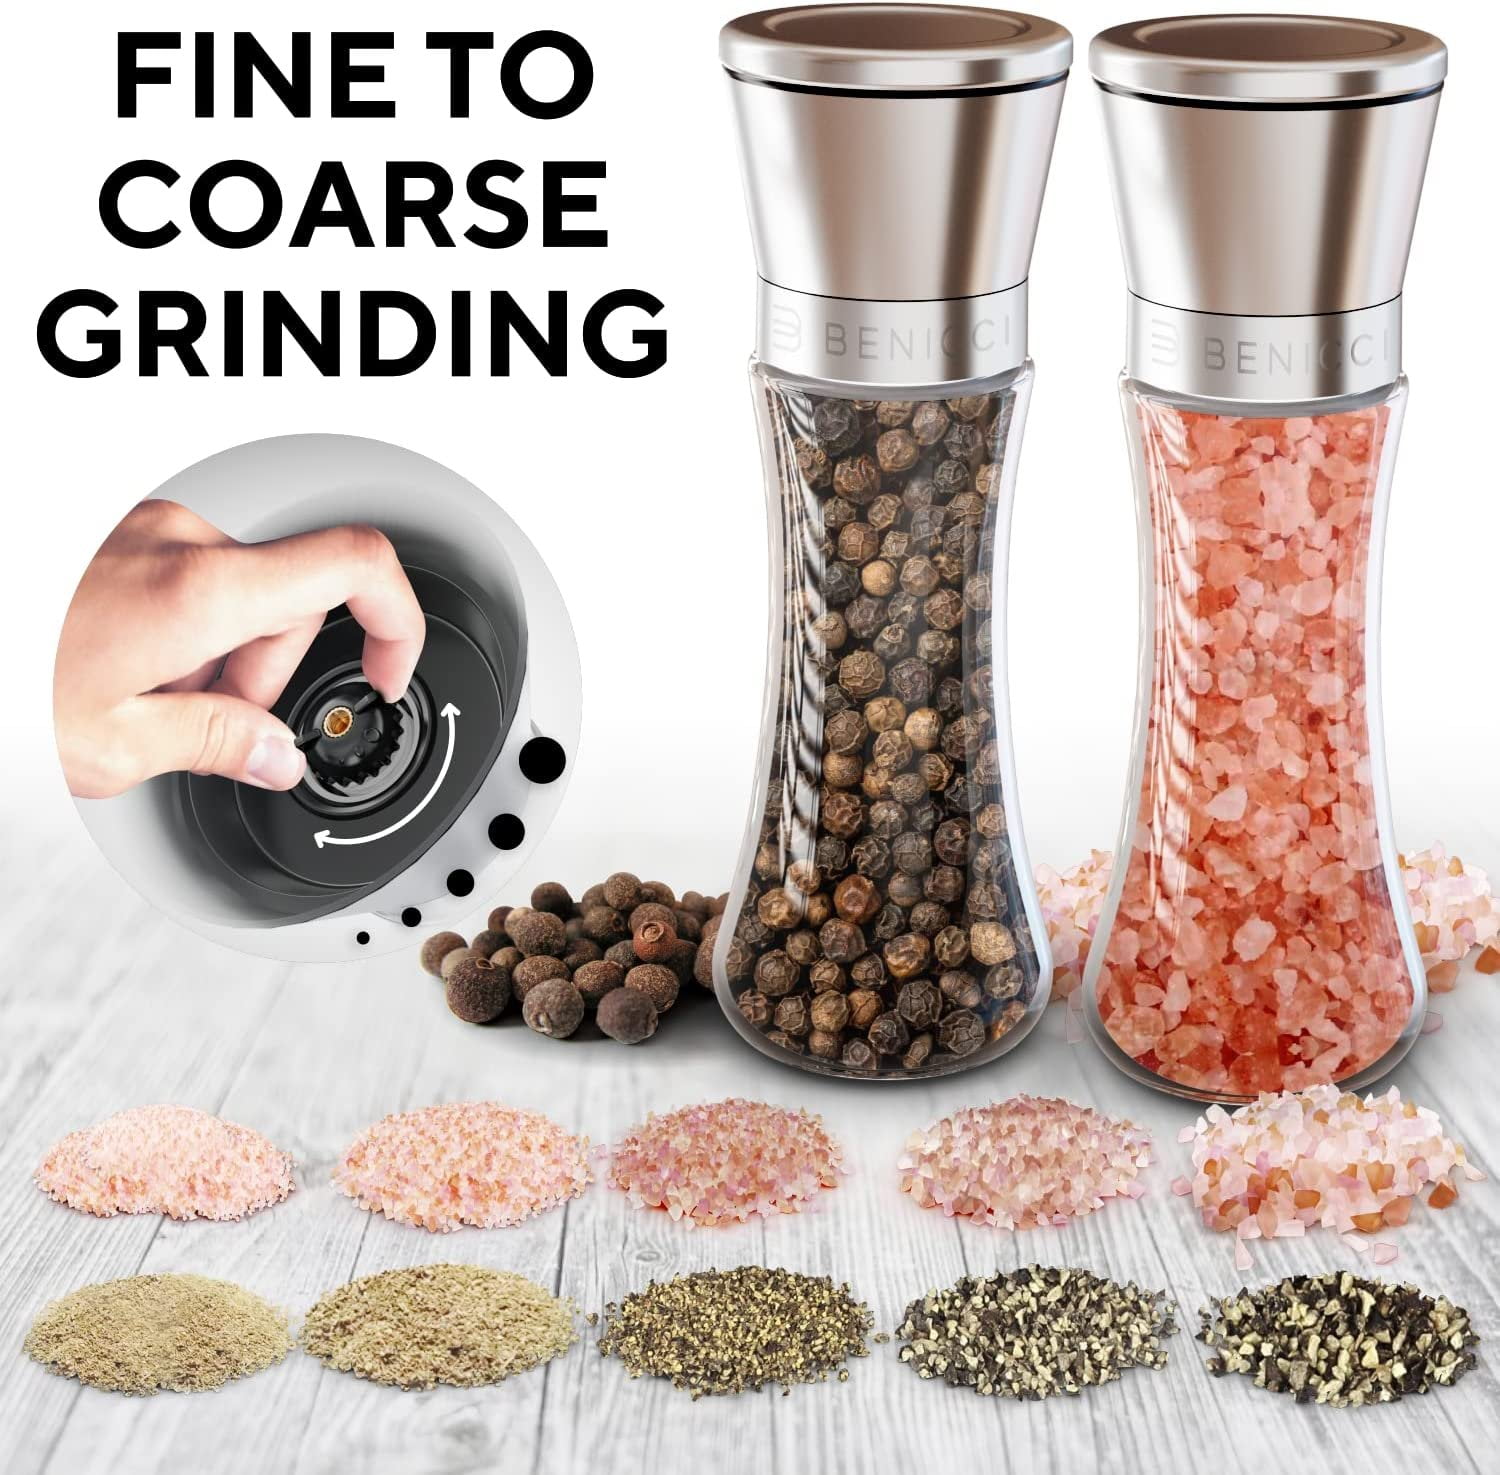 L'Chaim Meats Electric Salt or Pepper Grinder Stainless Steel Shakers –  lchaimmeats